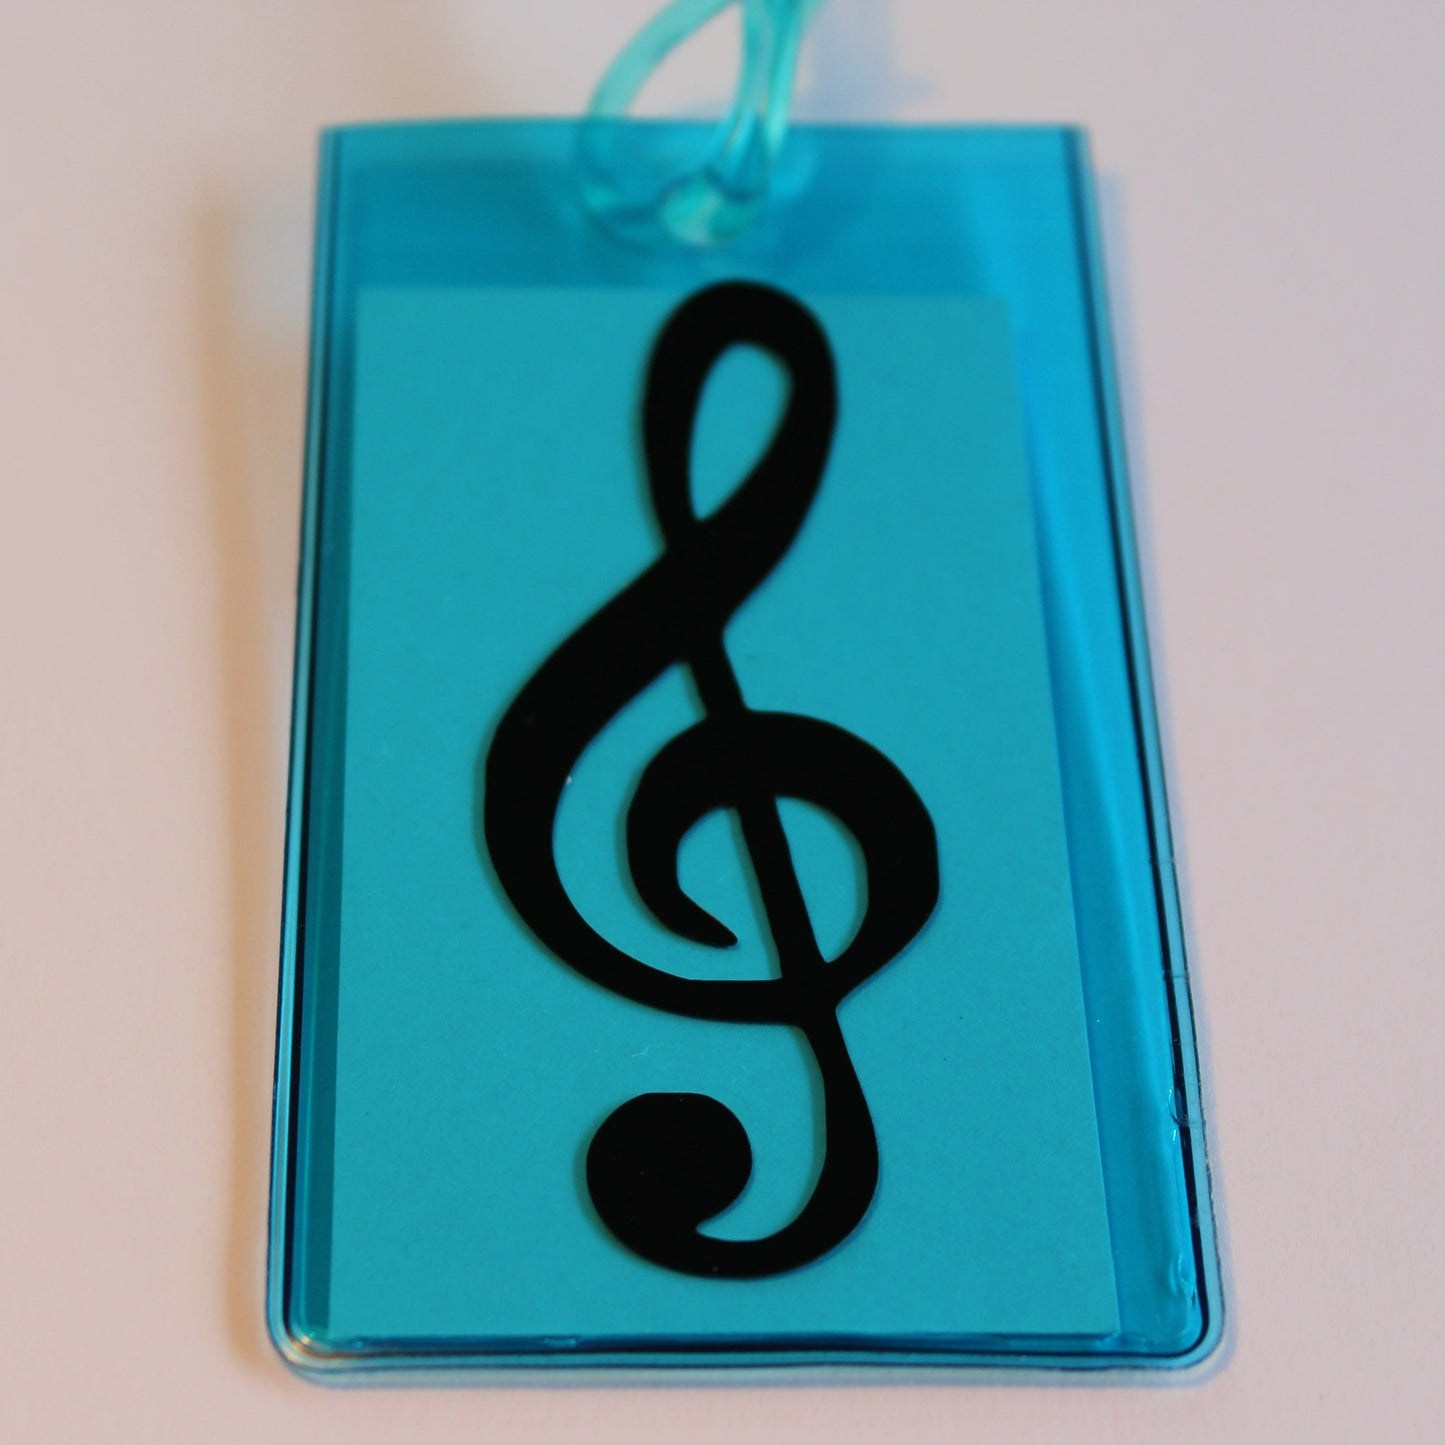 Blue instrument tag with black treble clef.